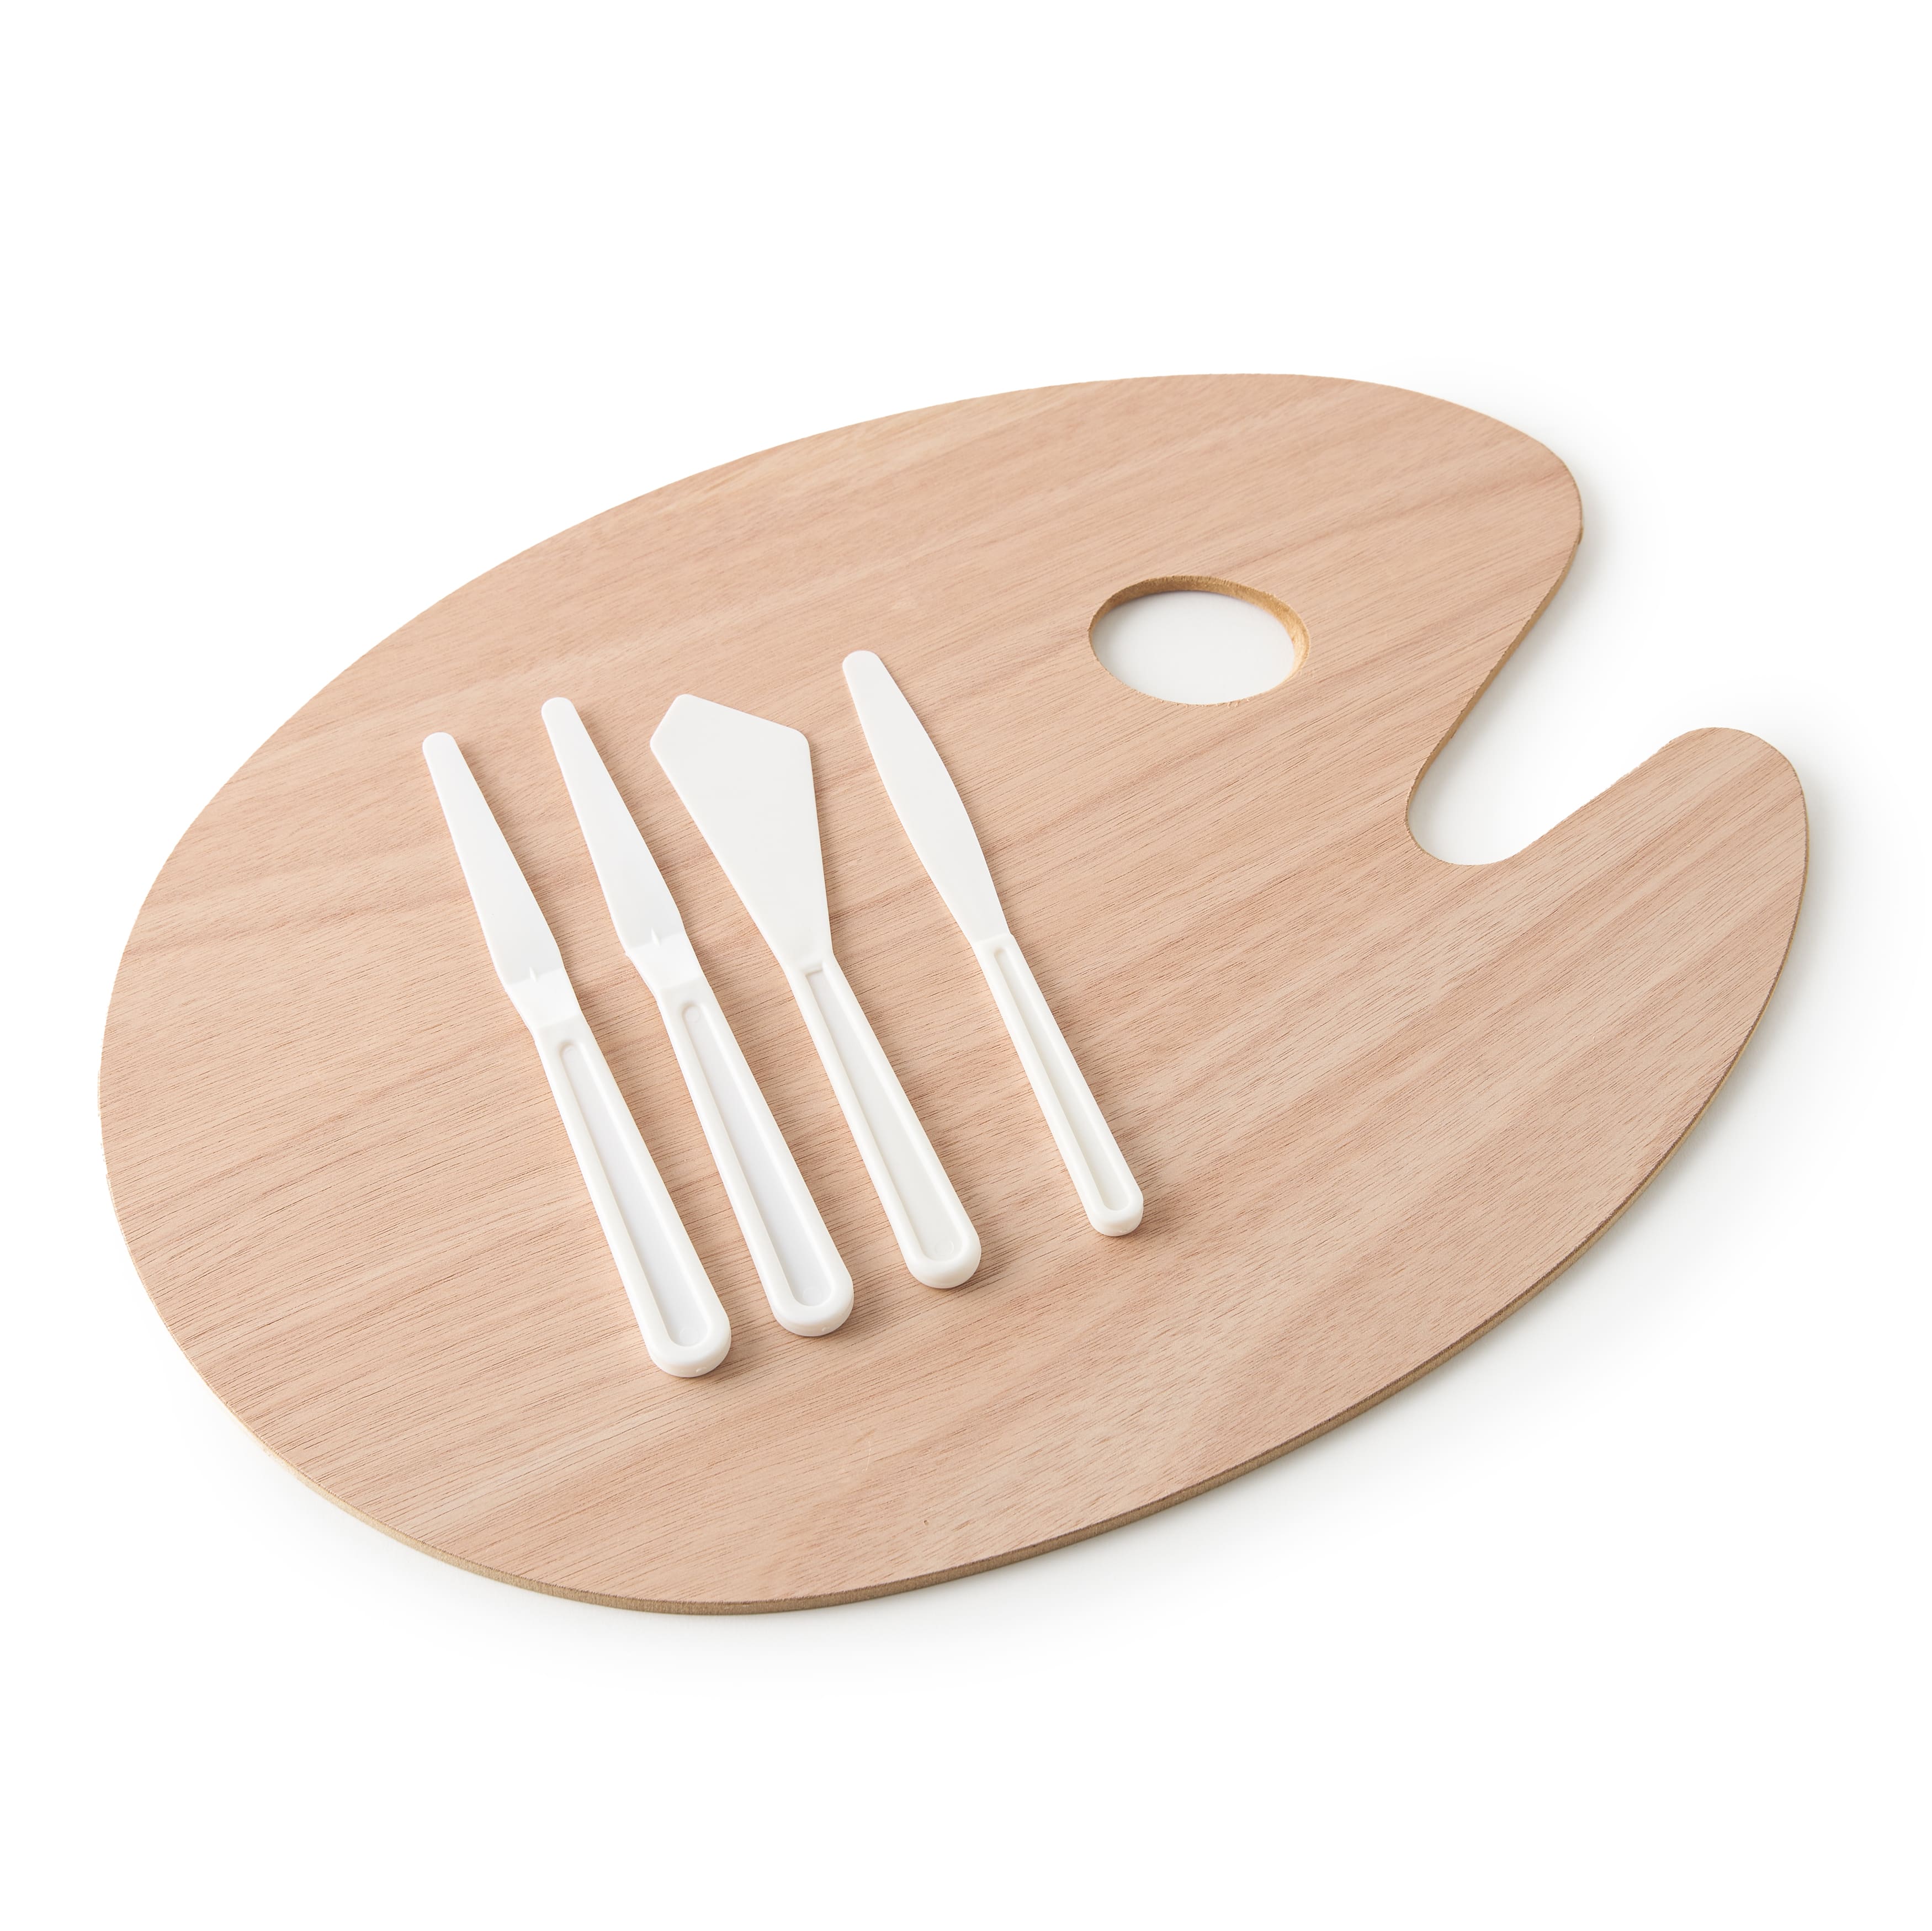 12 Pack: Oval Wooden Palette with Knives by Artist's Loft